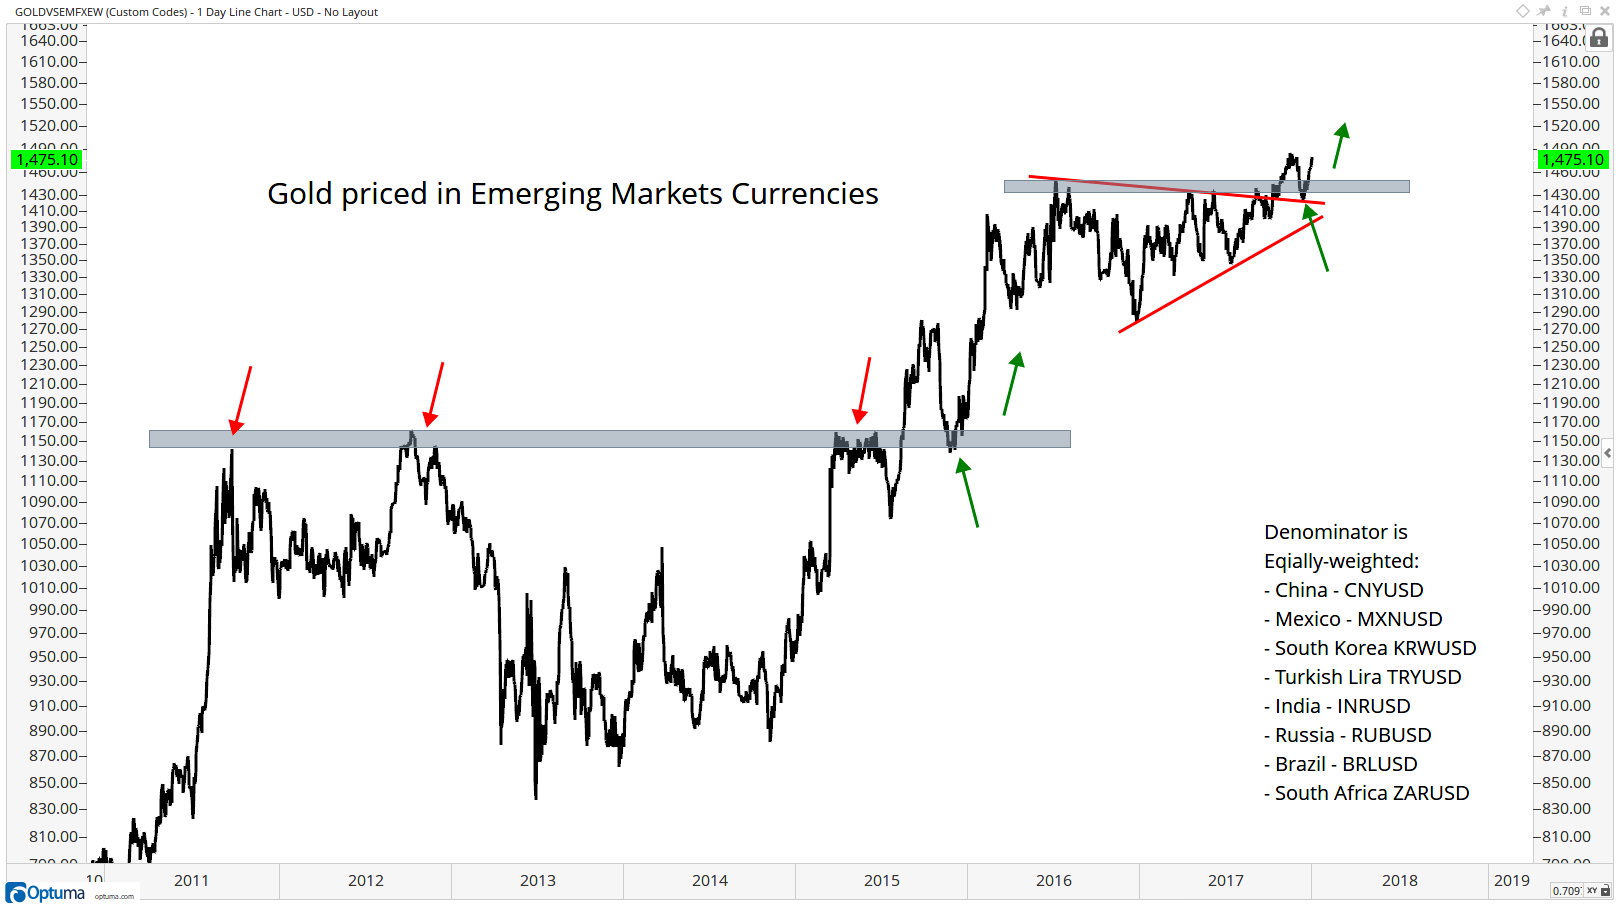 Gold Prices in Emerging Markets Currencies, 2010 - 2018